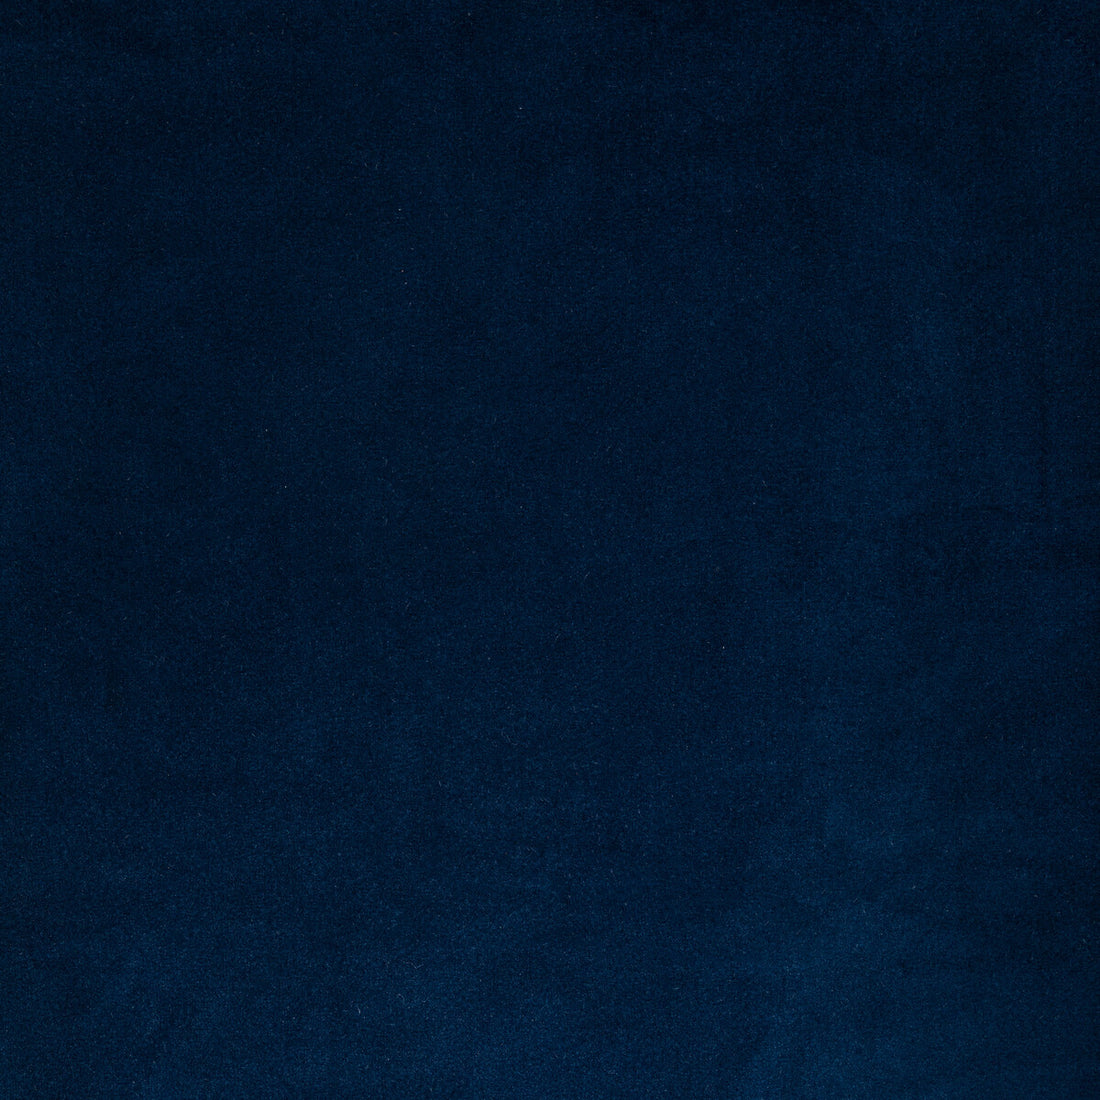 Rocco Velvet fabric in cobalt color - pattern KW-10065.3685MG59.0 - by Kravet Contract